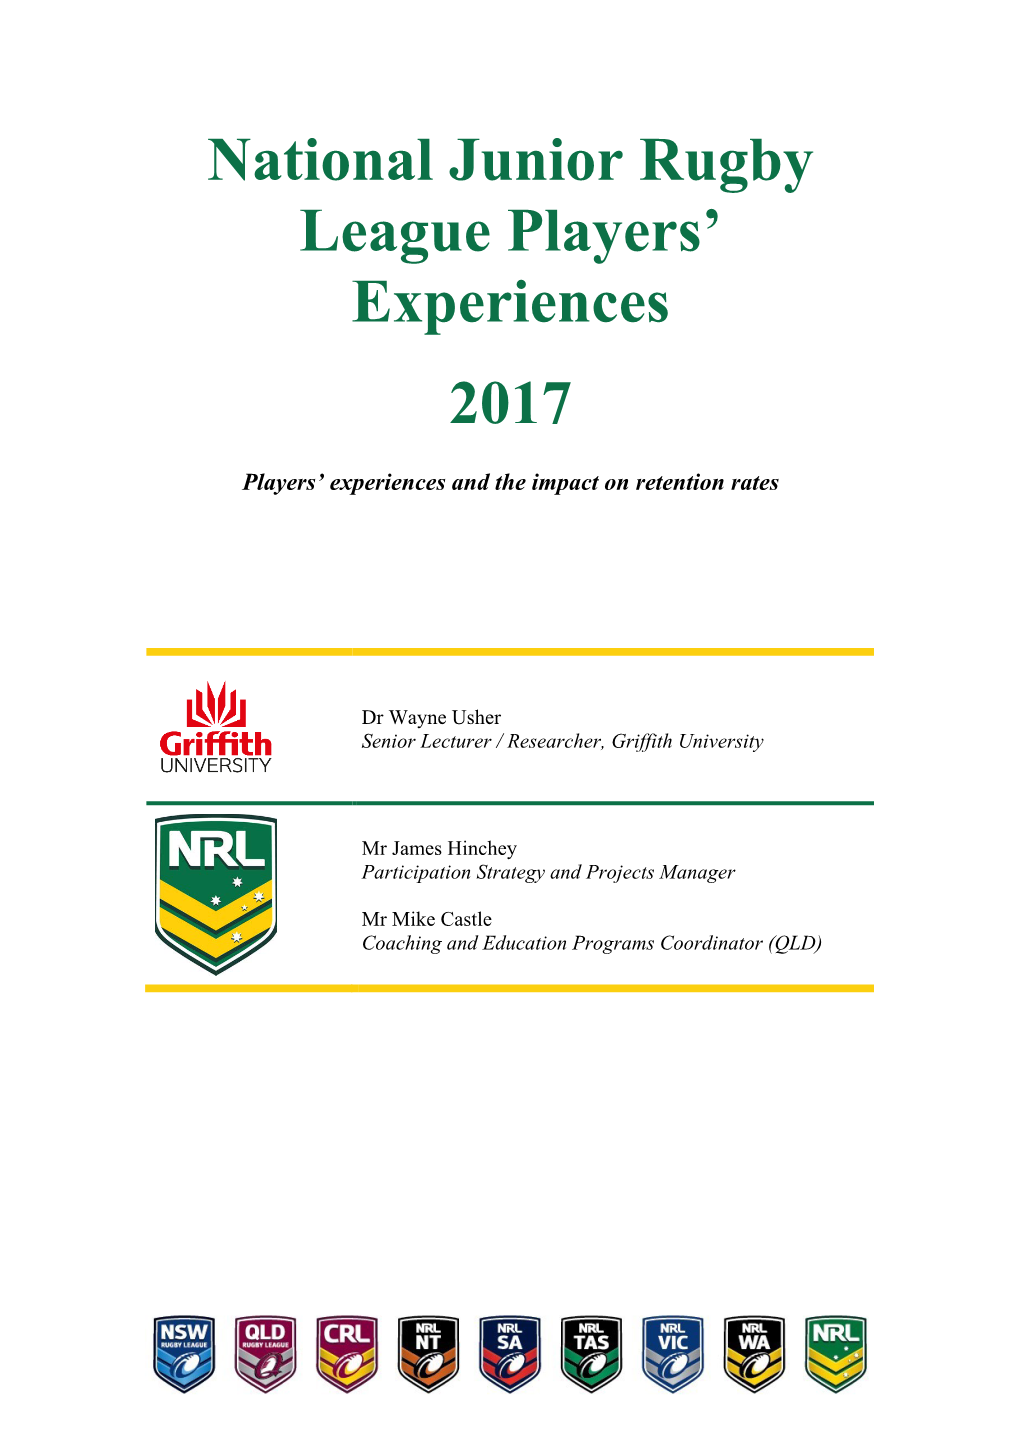 National Junior Rugby League Players' Experiences 2017